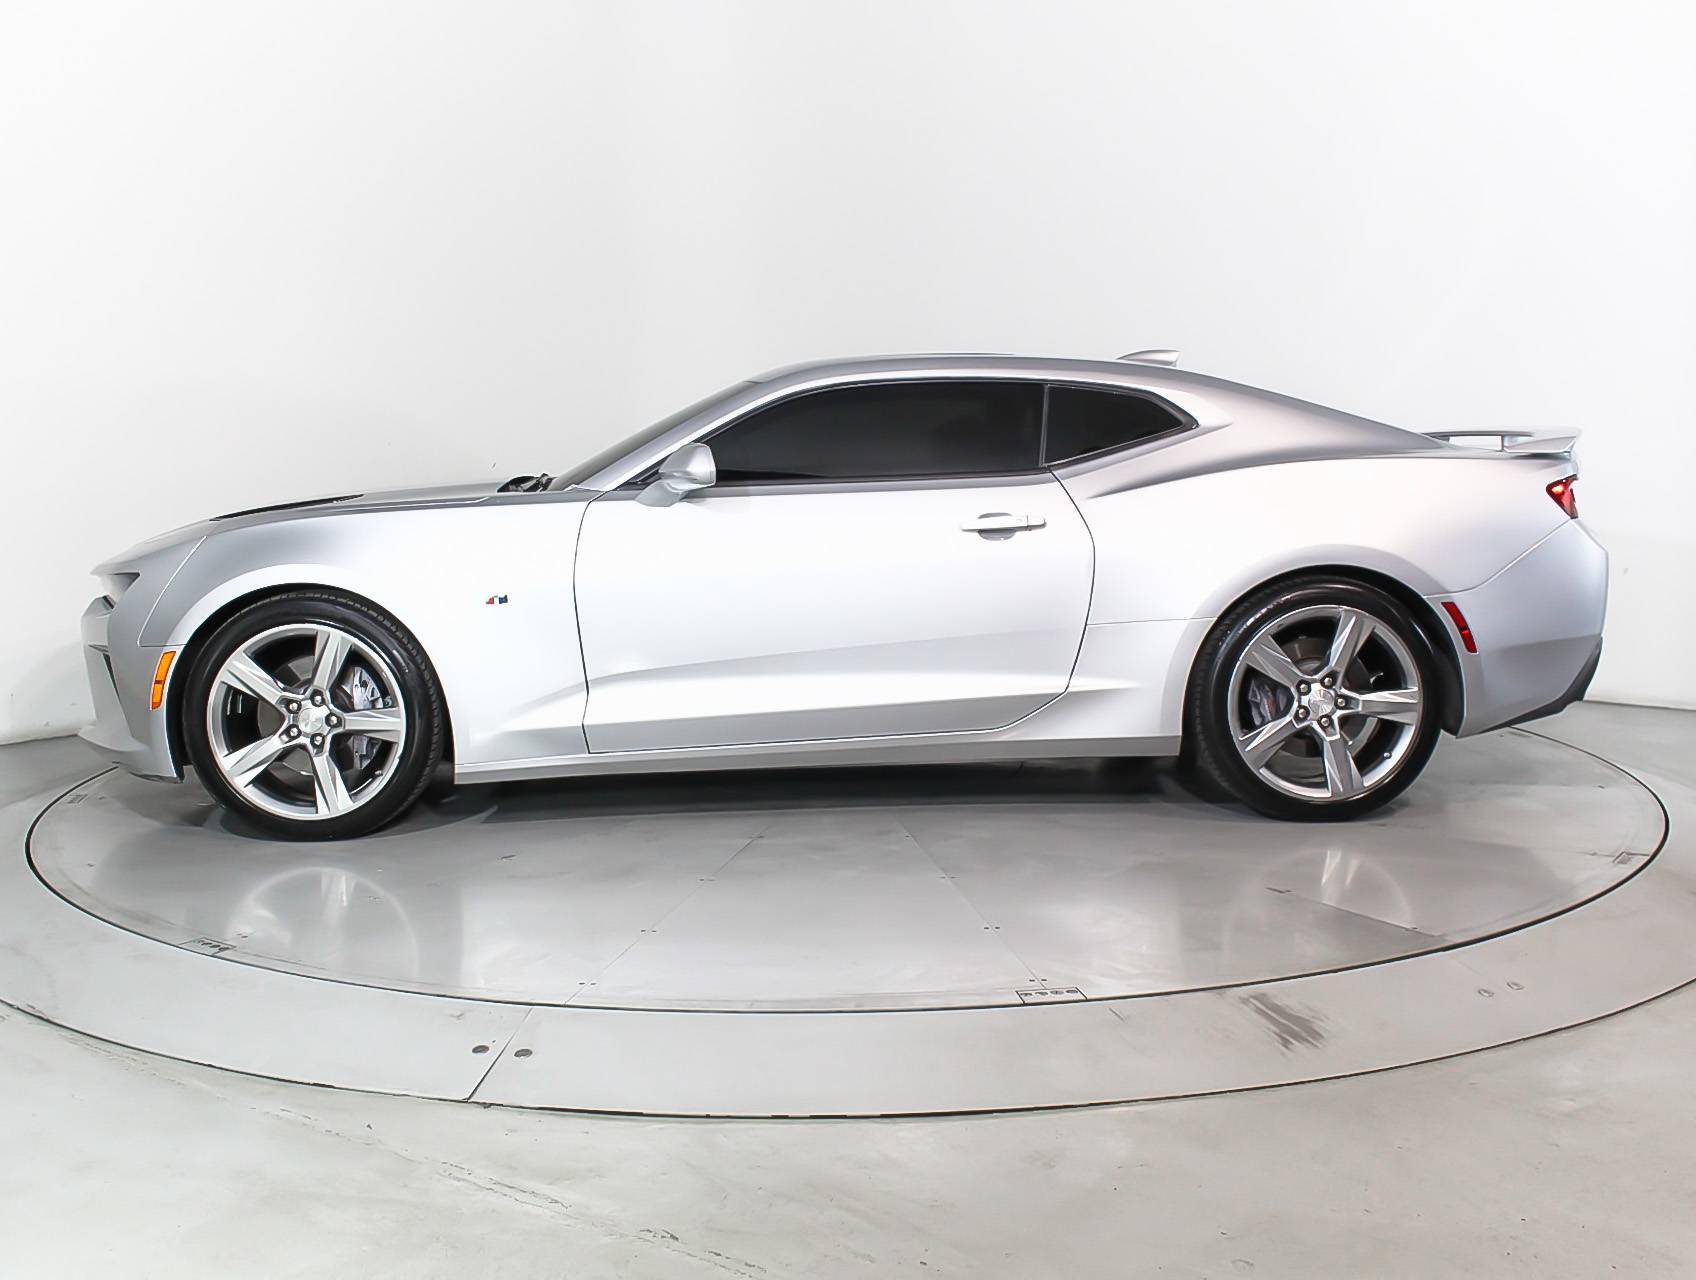 Florida Fine Cars - Used CHEVROLET CAMARO 2017 WEST PALM 1SS